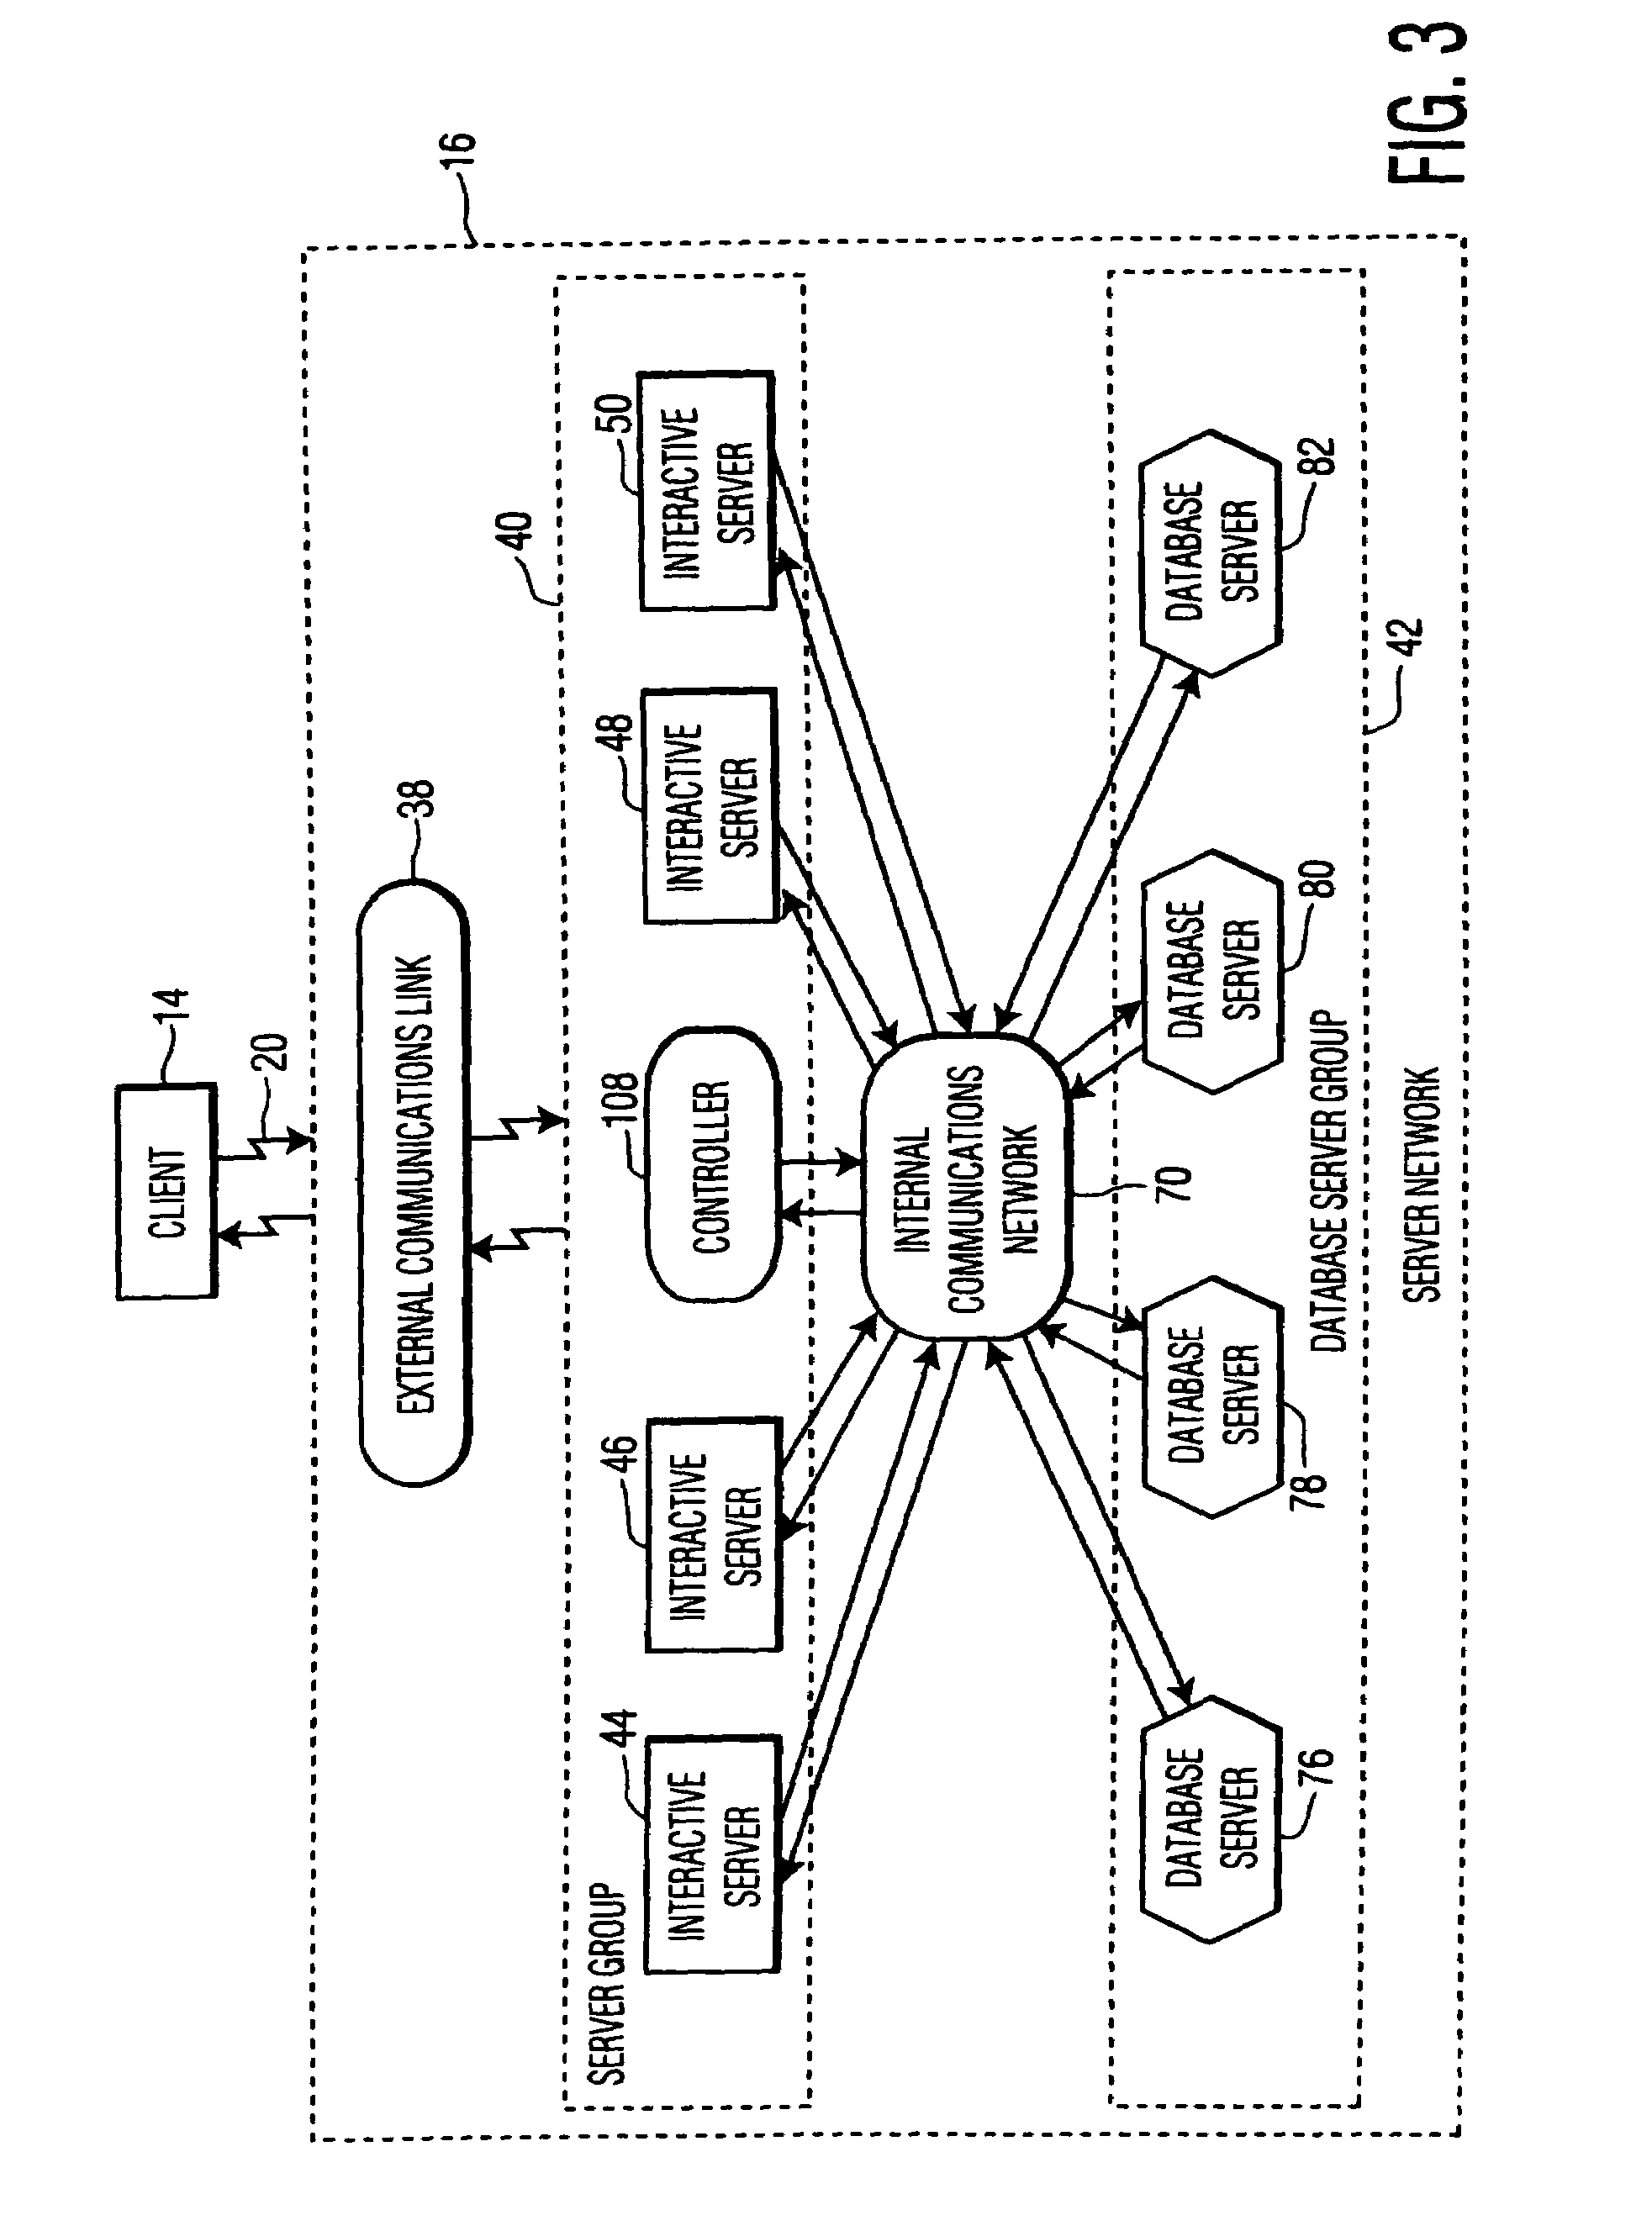 Method and system for automatically configuring a client-server network